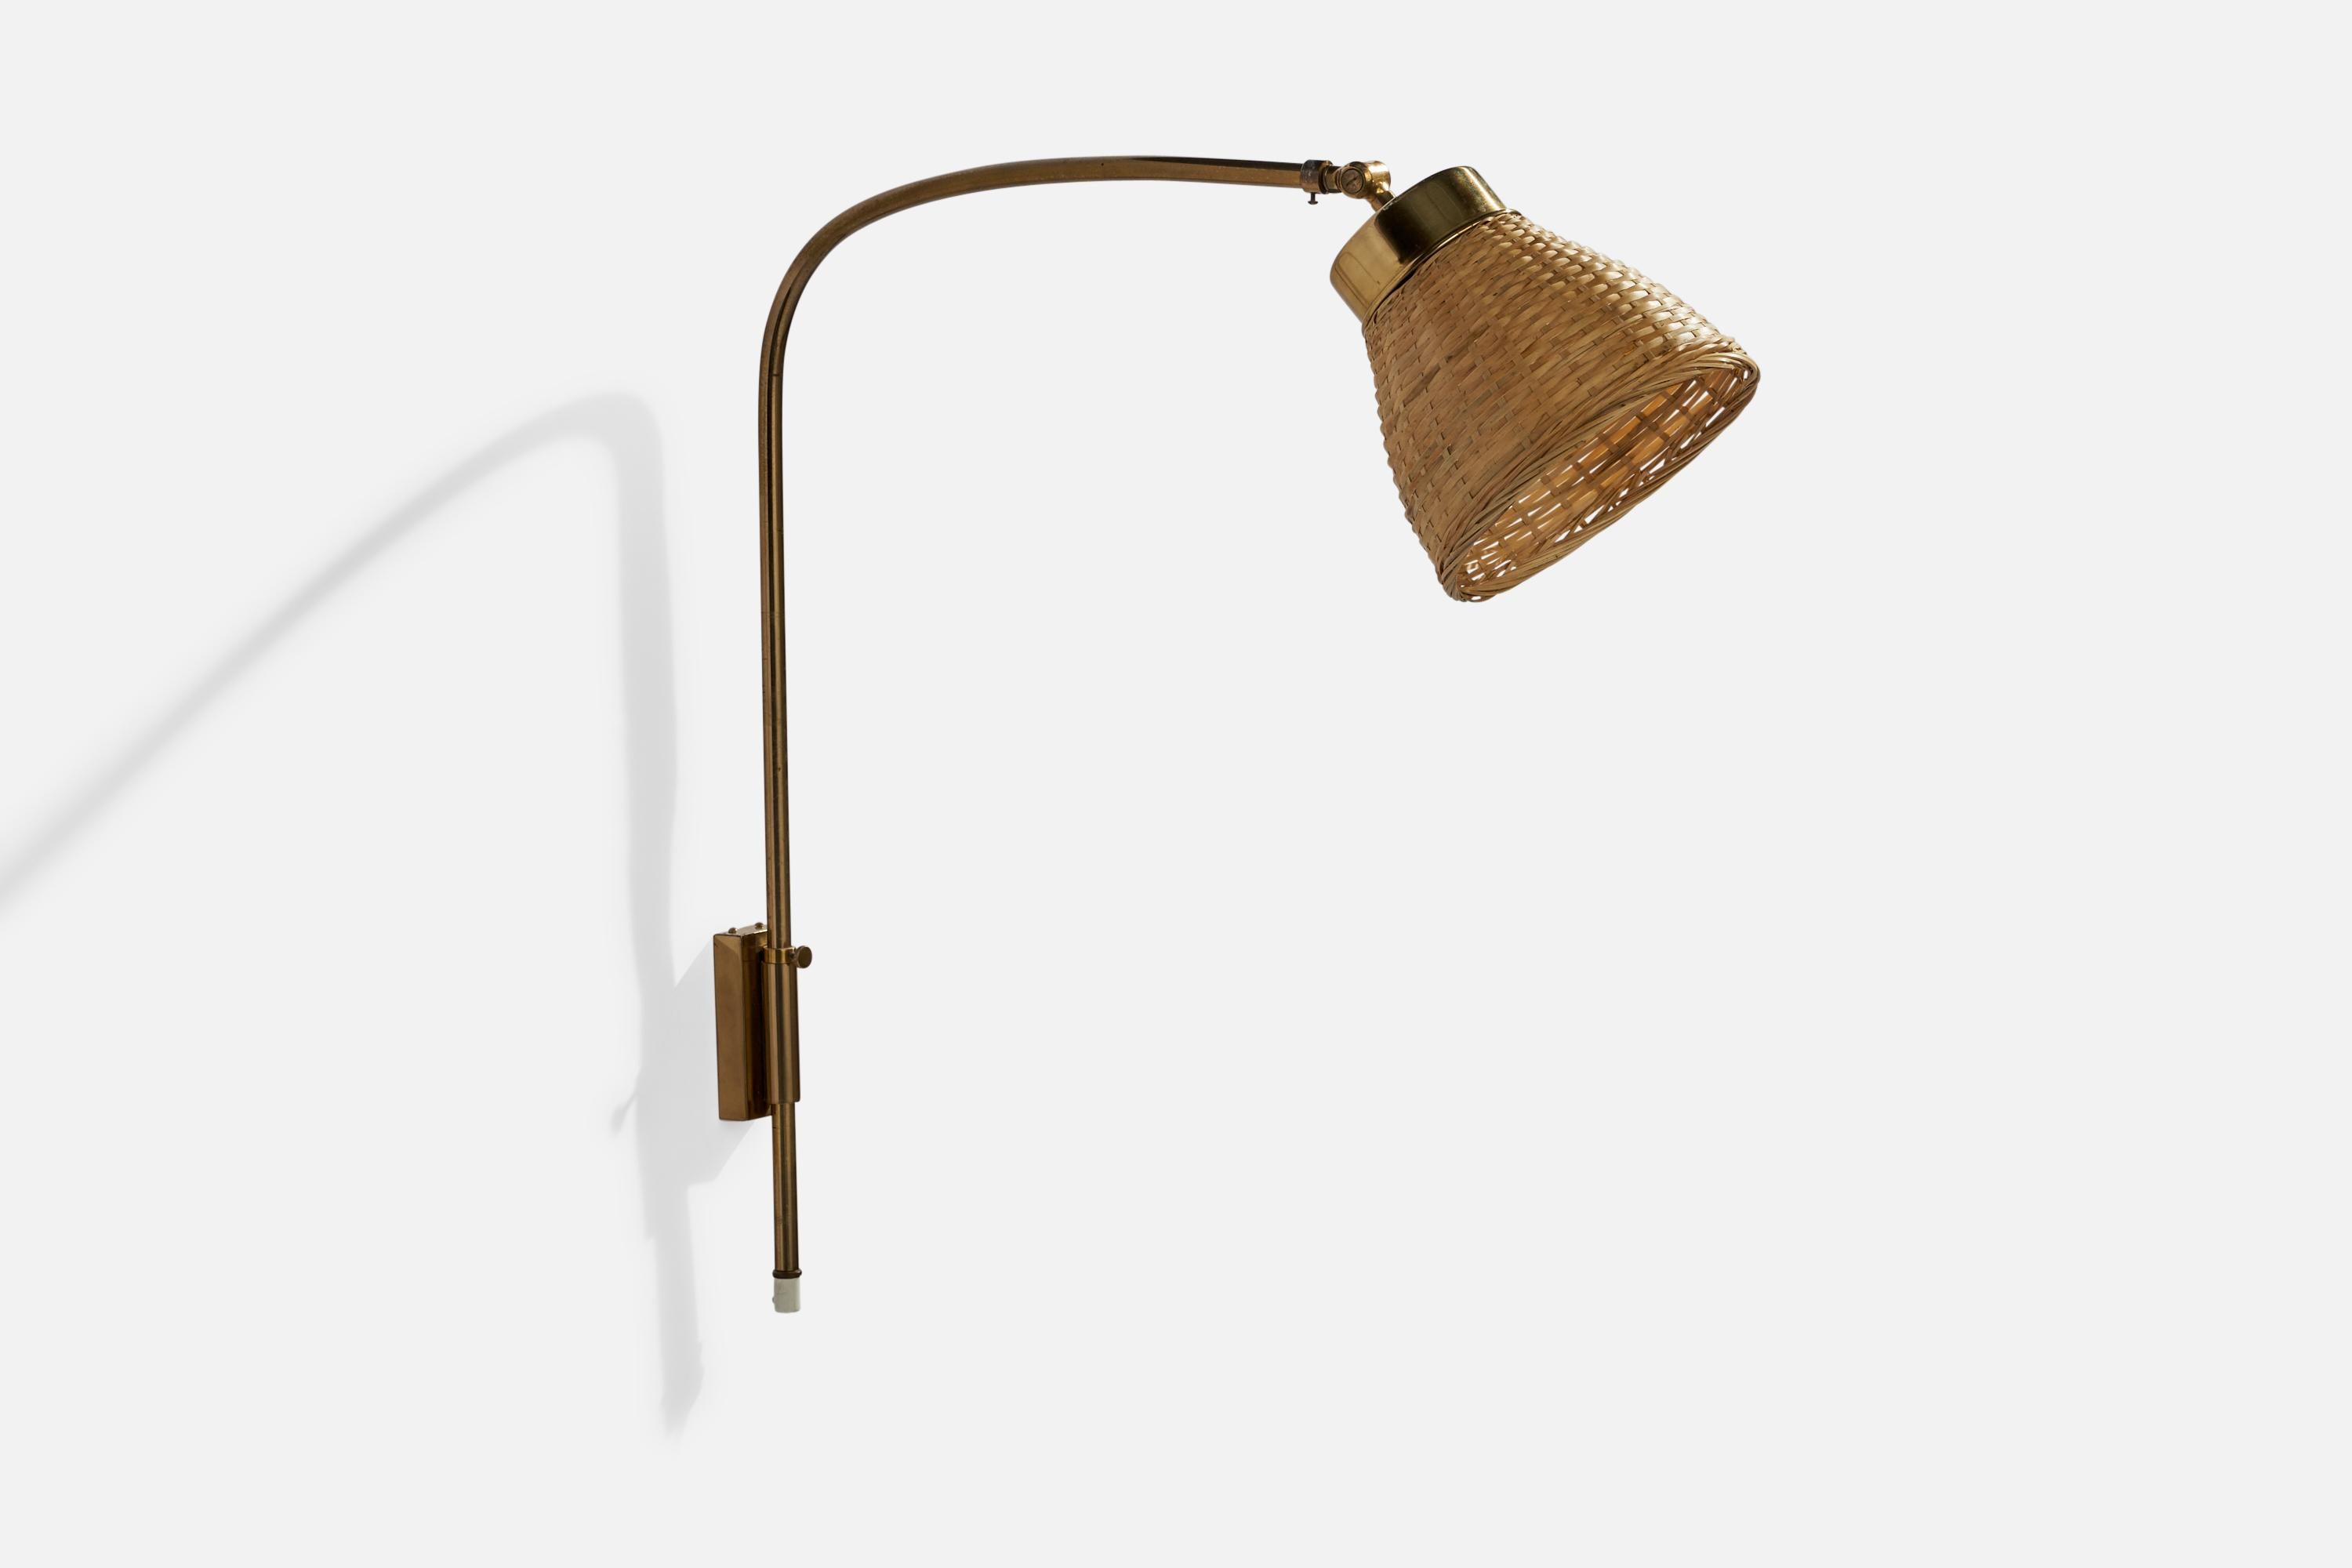 An adjustable brass and rattan wall light designed by Josef Frank and produced by Svenskt Tenn, Sweden, 1950s.

Overall Dimensions (inches): 23” H x 14” W x 17”  D
Back Plate Dimensions (inches): 4” H x 1.5”  W x .75” D
Bulb Specifications: E-26